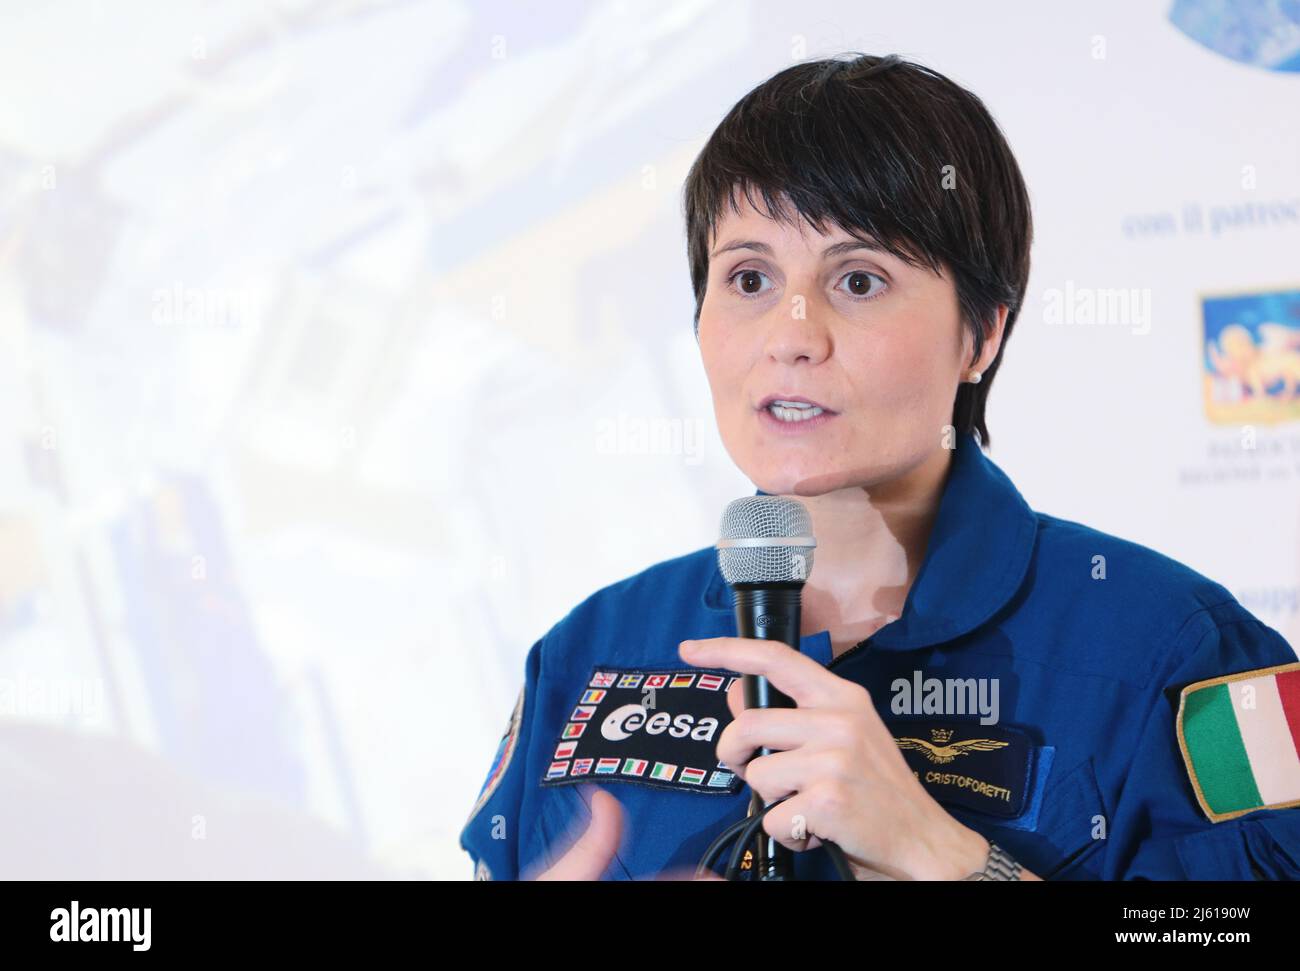 Samantha Cristoforetti at the 7th International Meeting Ladies Pilot  in the 2016 Stock Photo